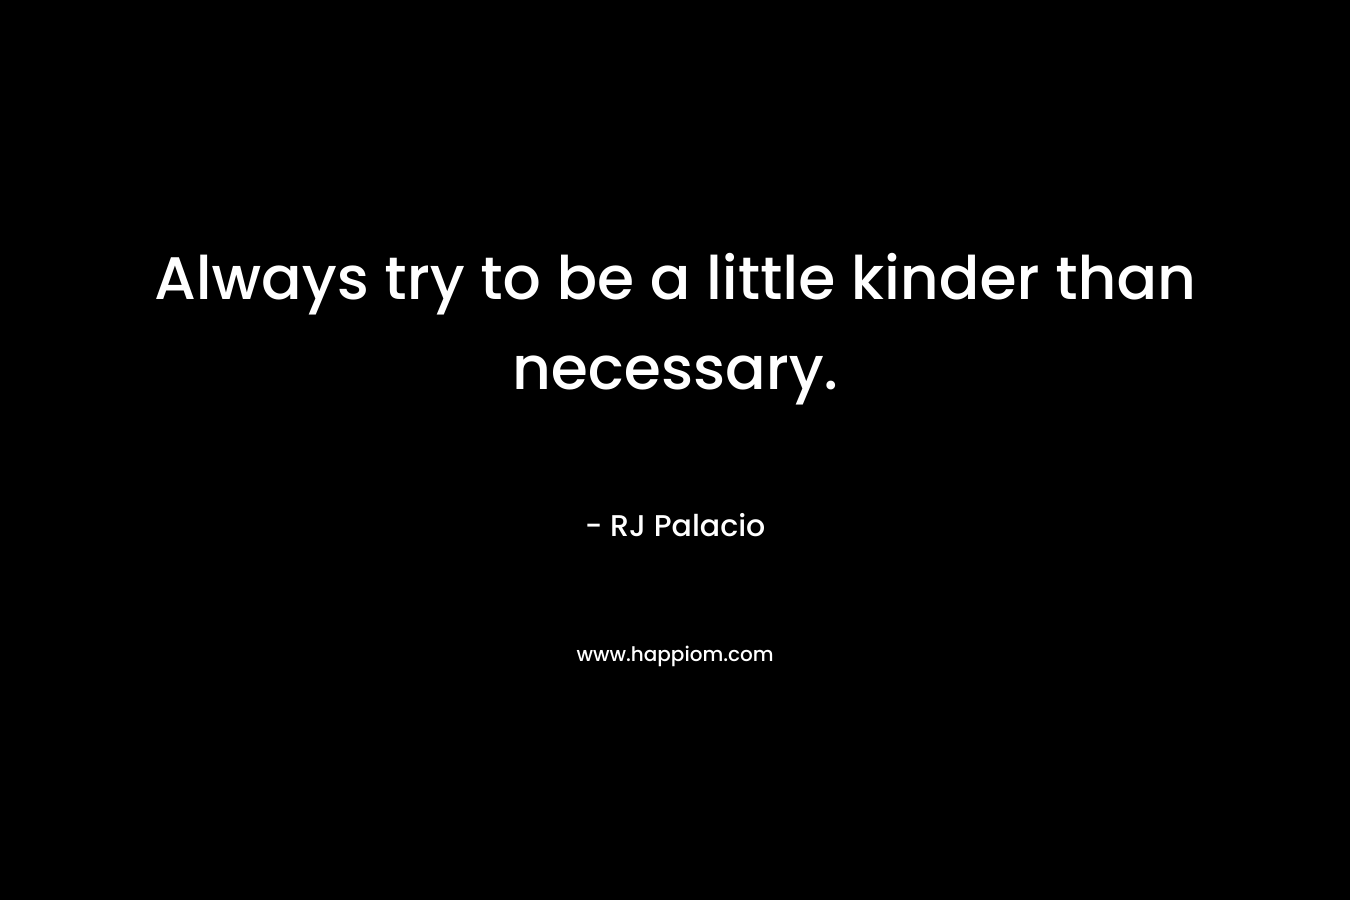 Always try to be a little kinder than necessary. – RJ Palacio